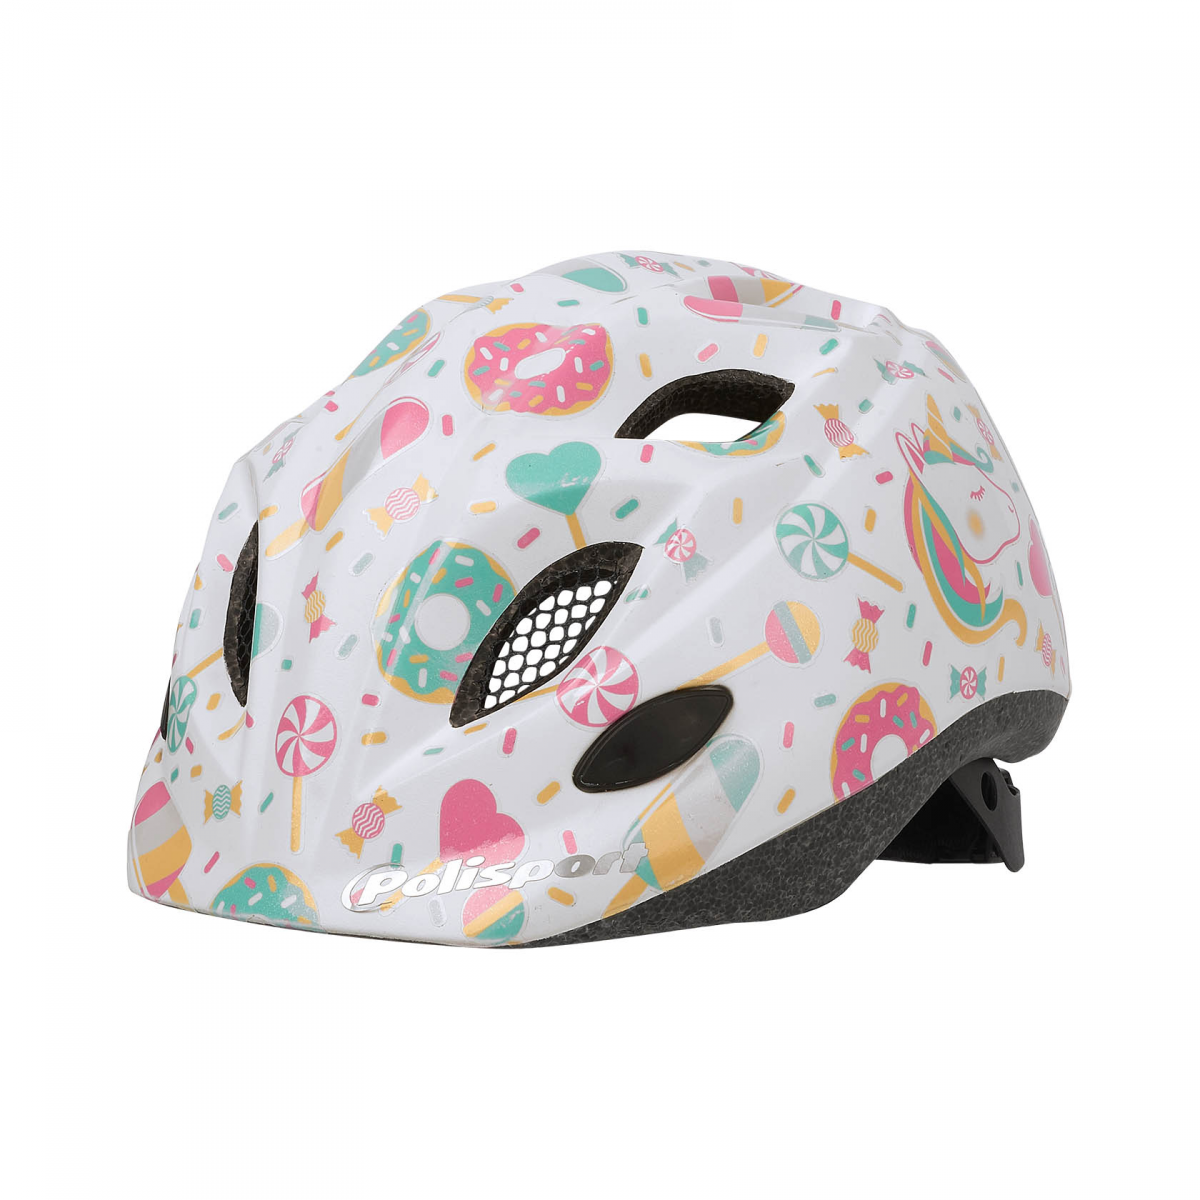 XS Premium - Bicycle Helmet for Kids White and Pink - 8740800001_Lolipops |